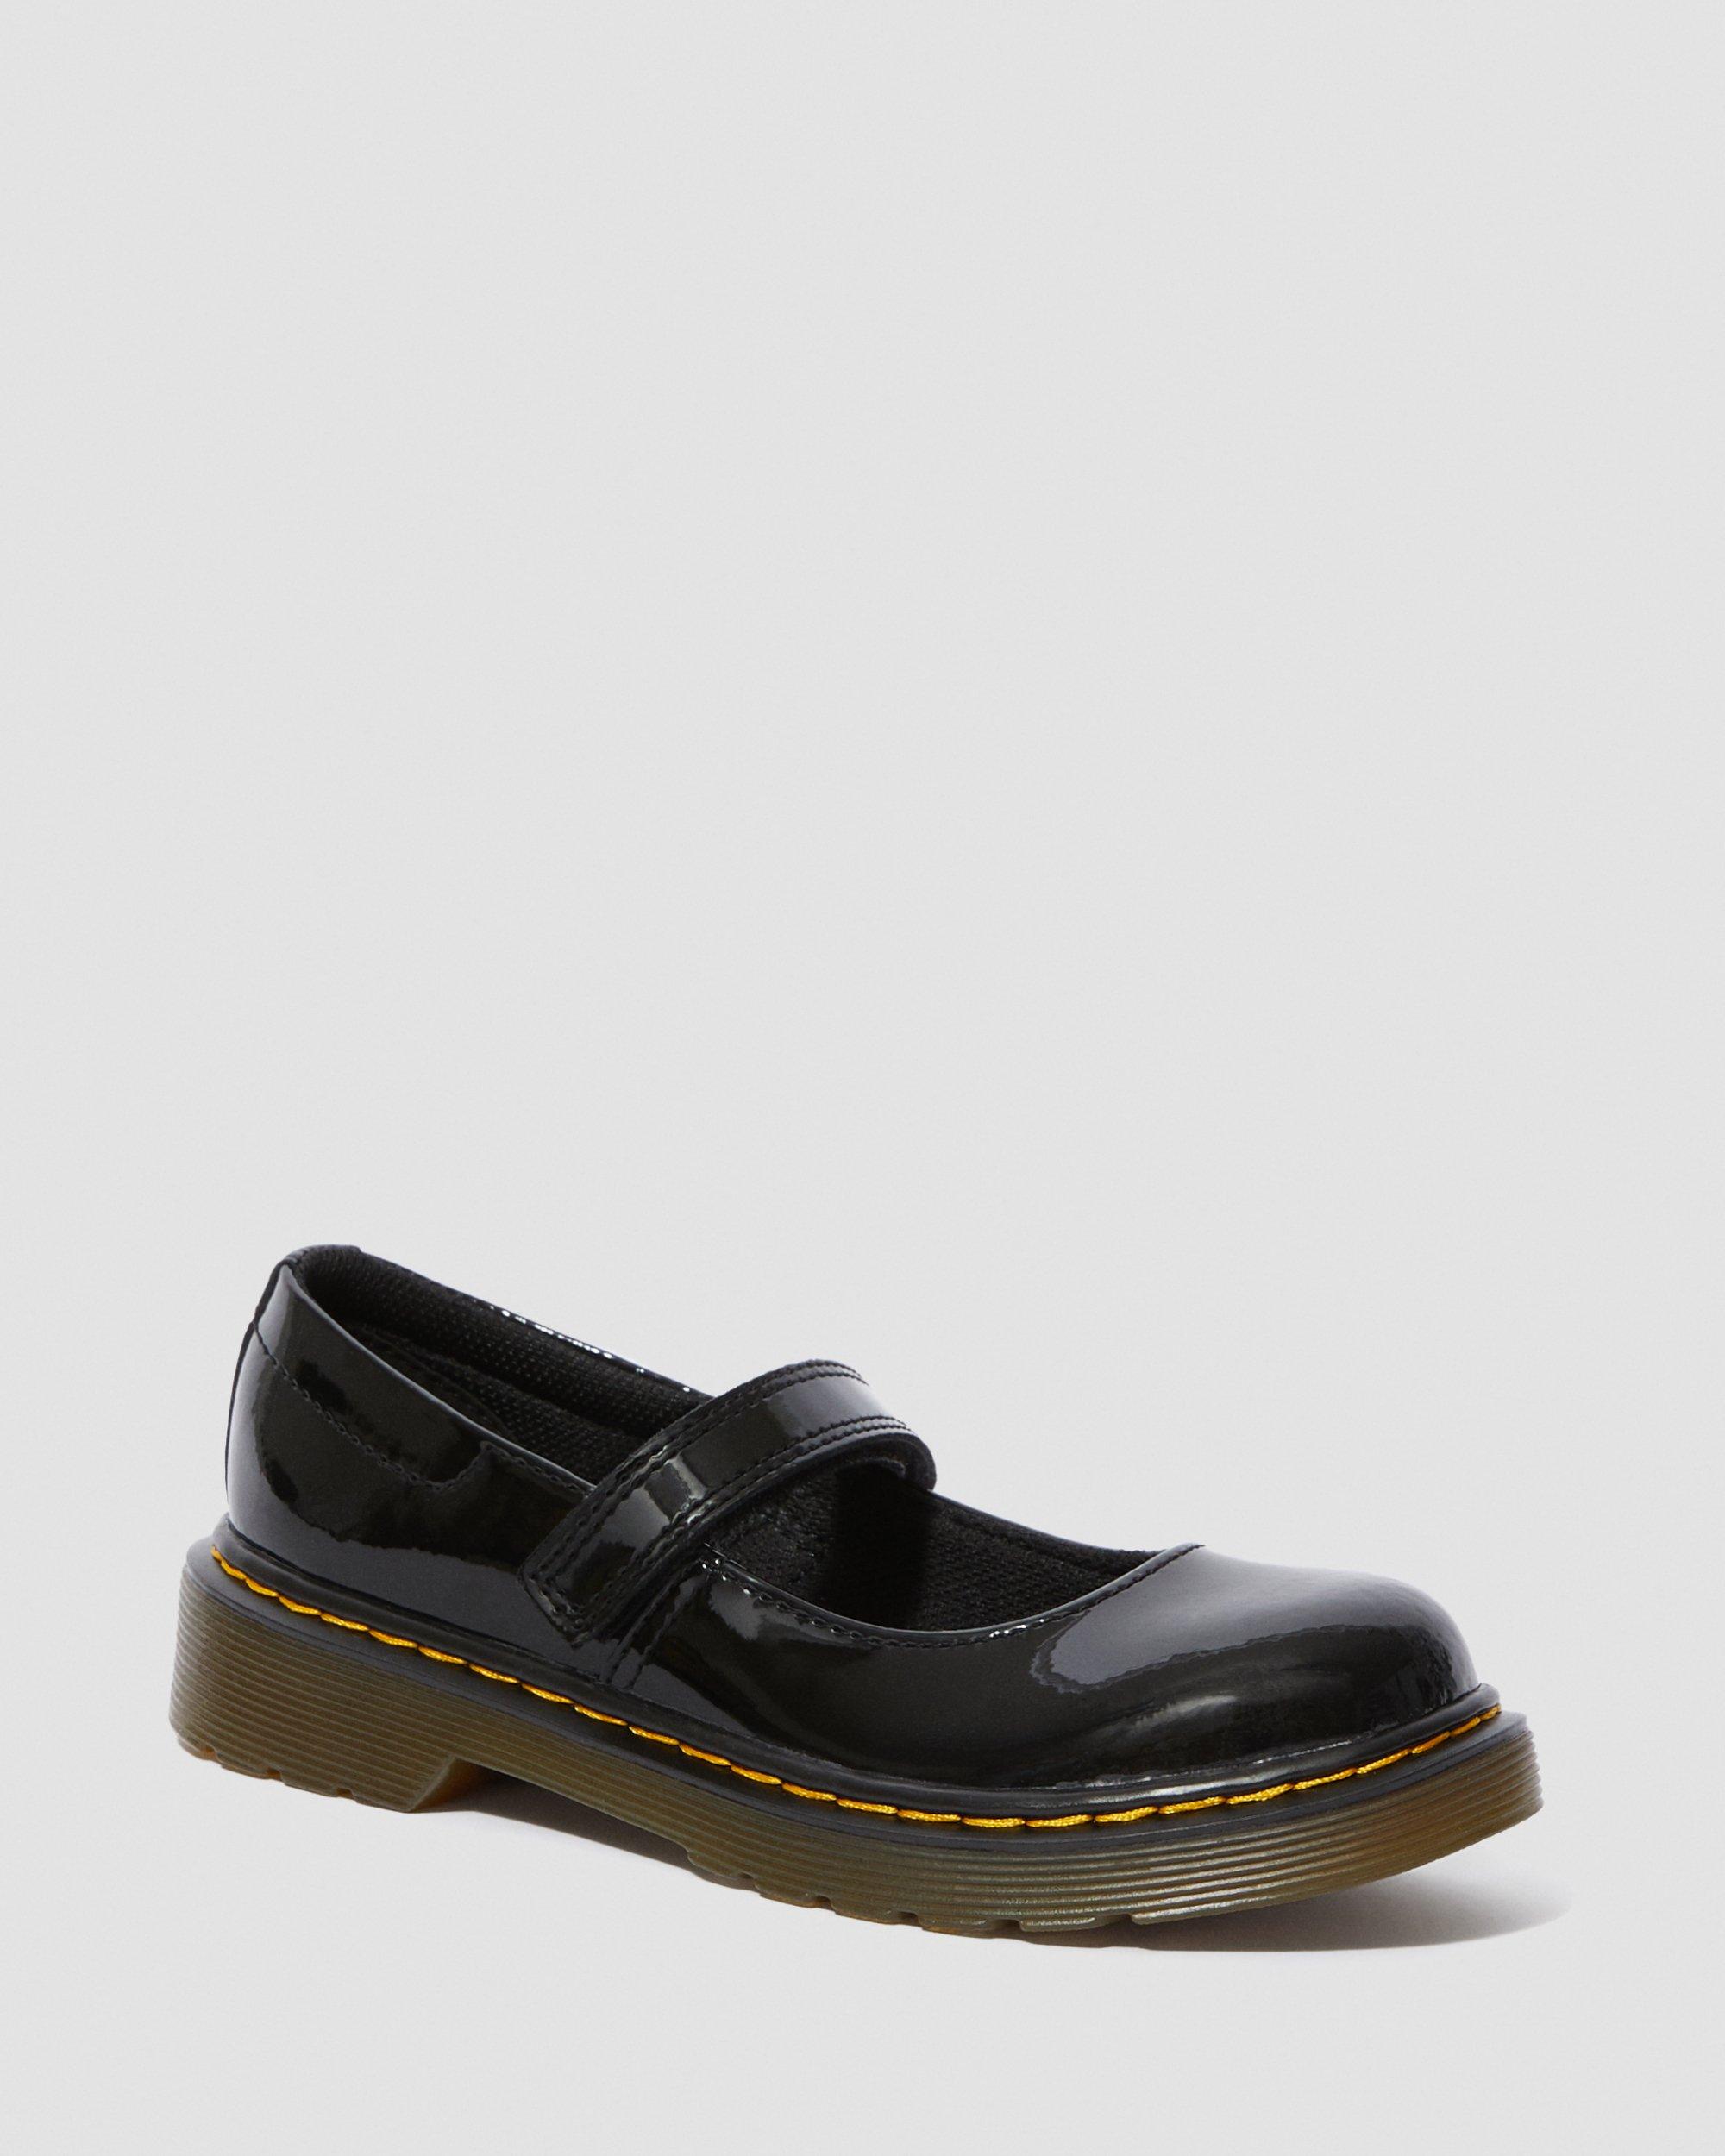 Junior Maccy Patent Leather Mary Jane Shoes in Black